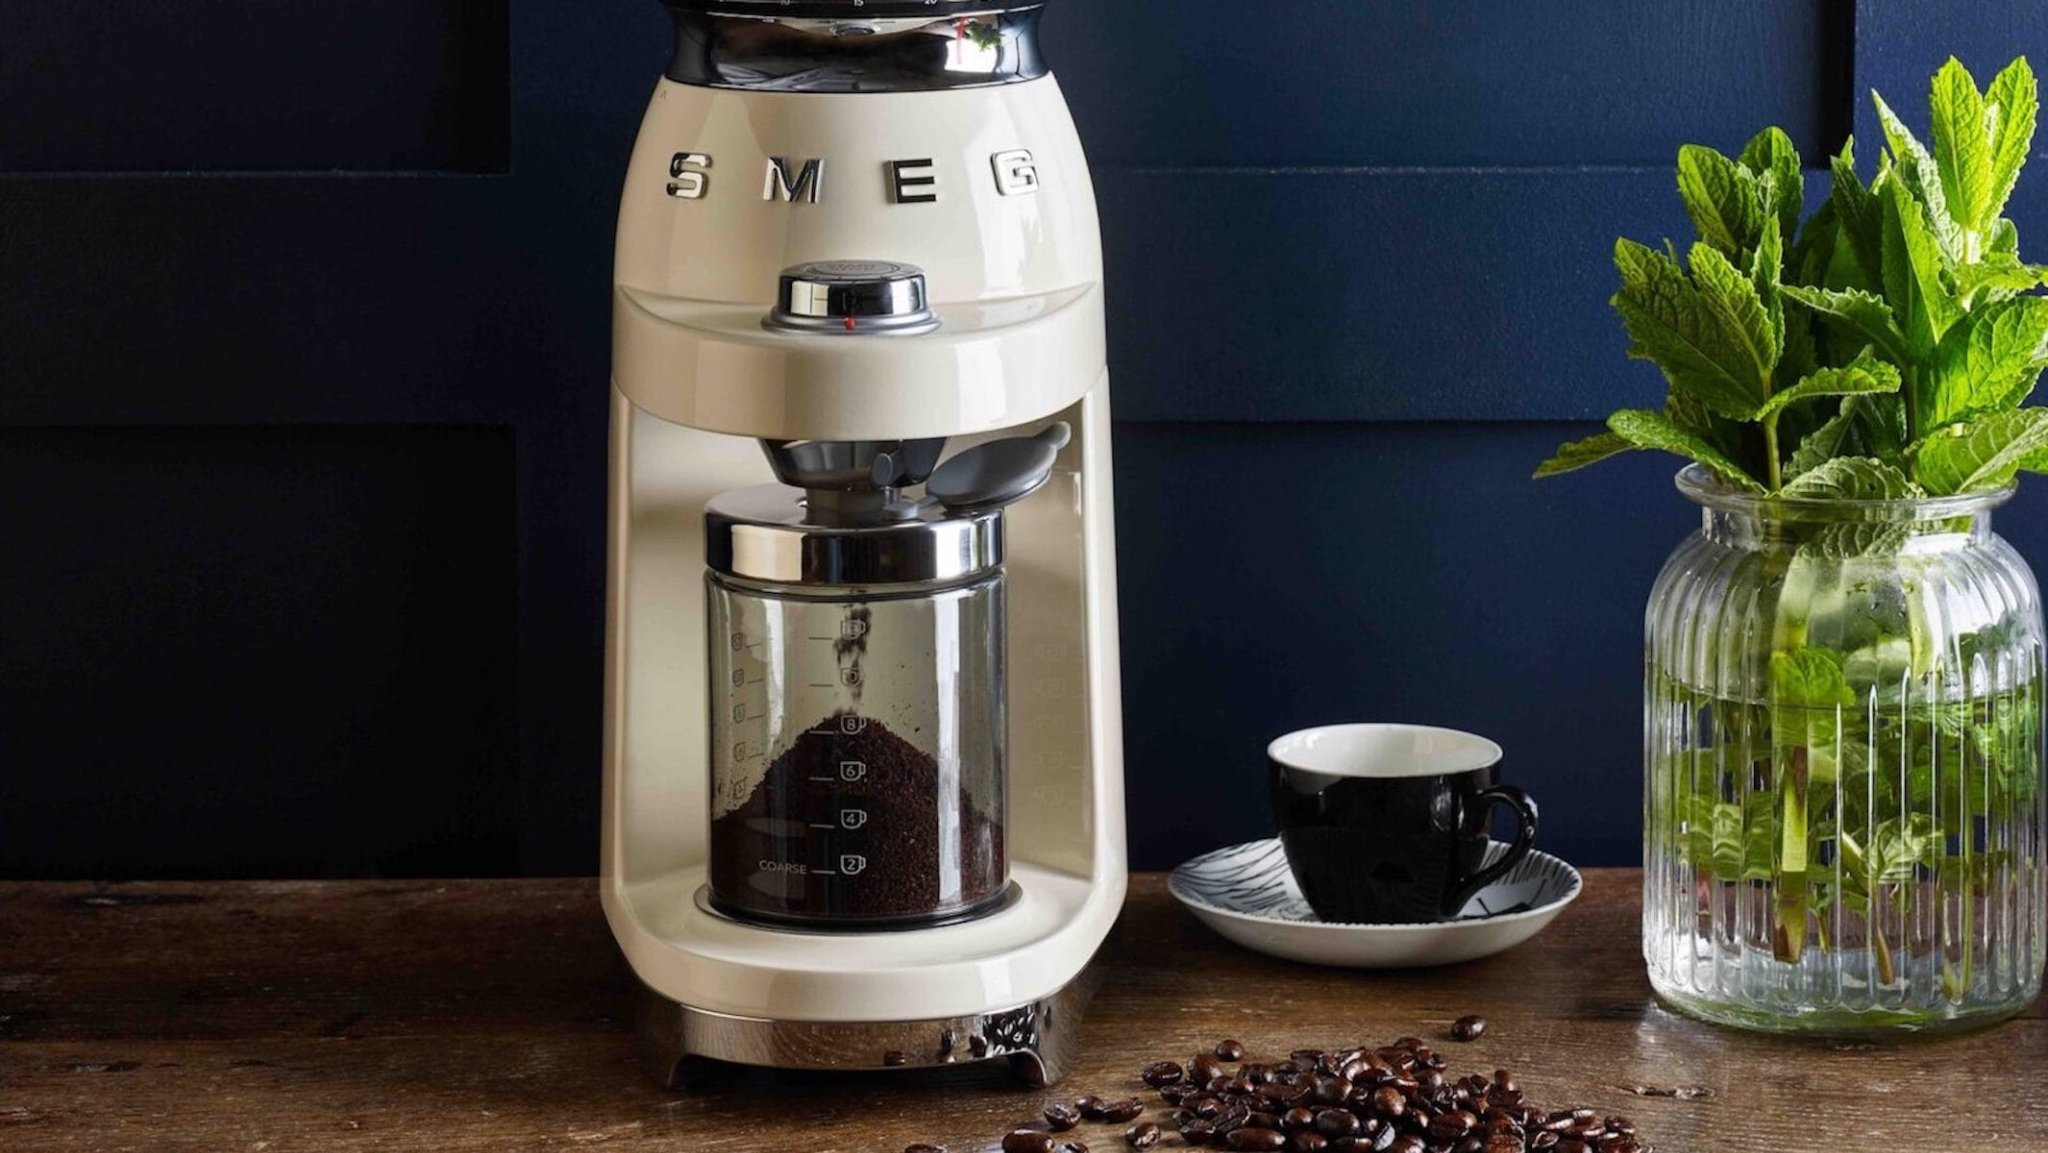 Holiday gift guide—the best gadget gifts for coffee nerds